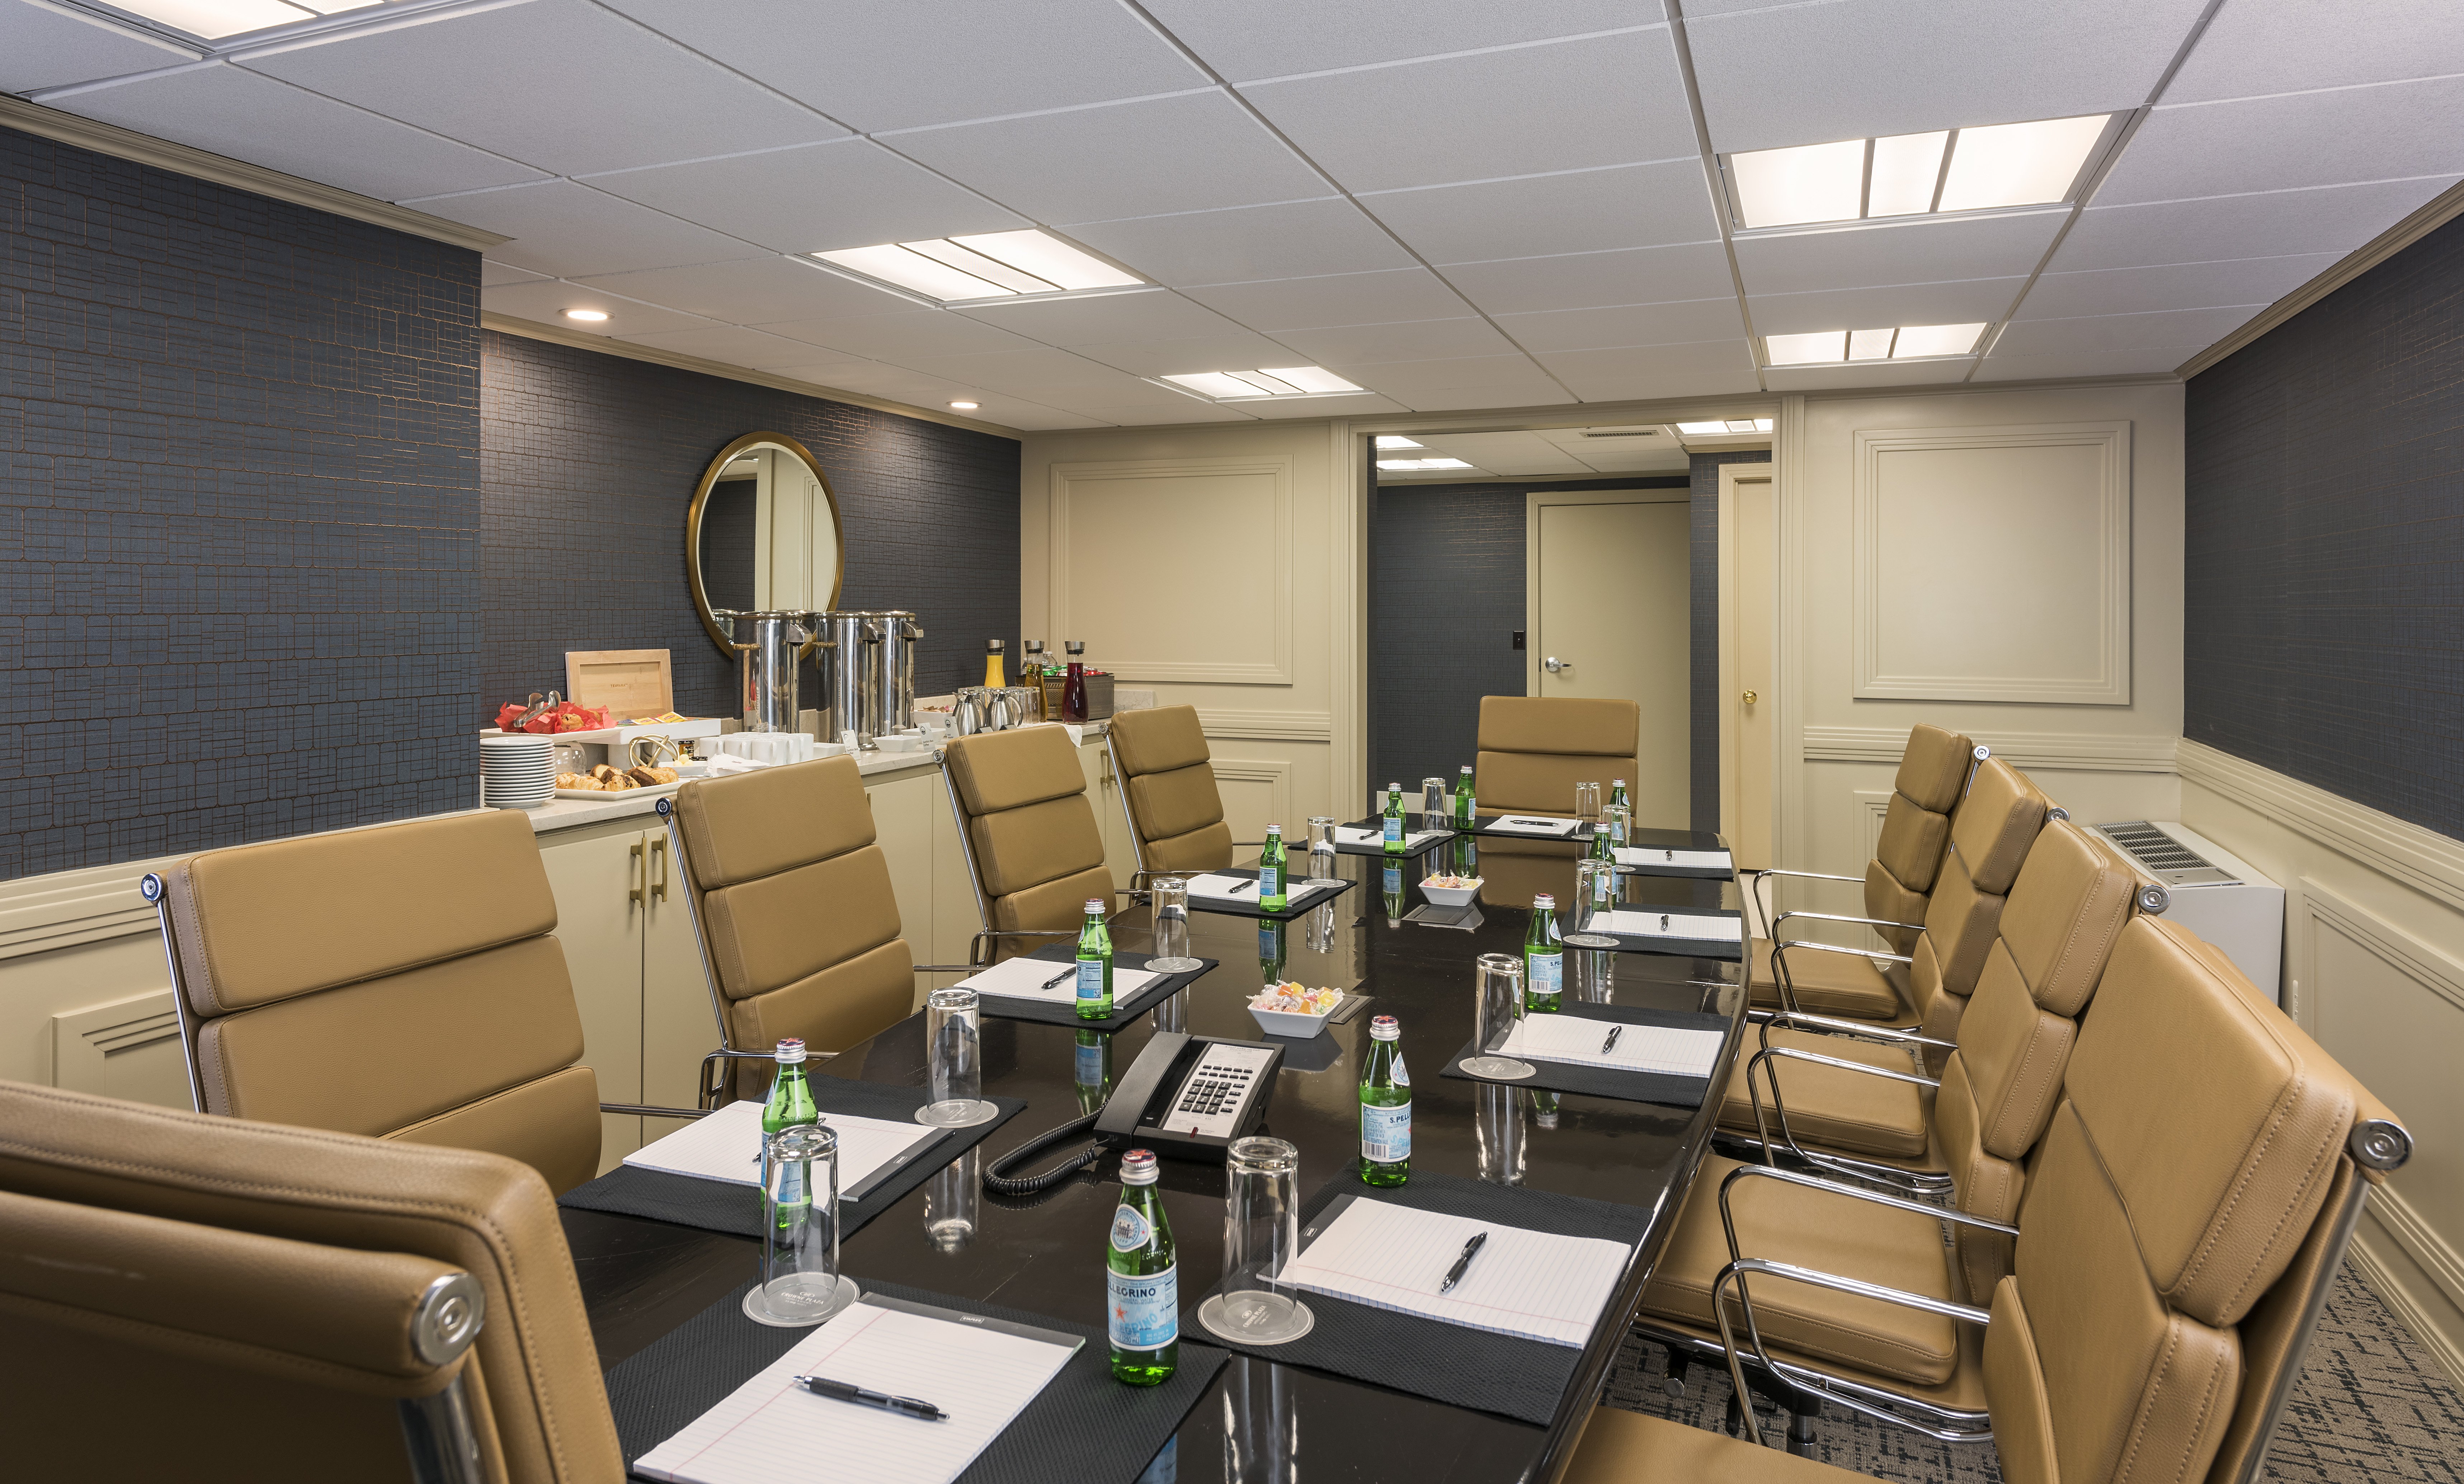 Our board room is ideal for business meetings and conferences.